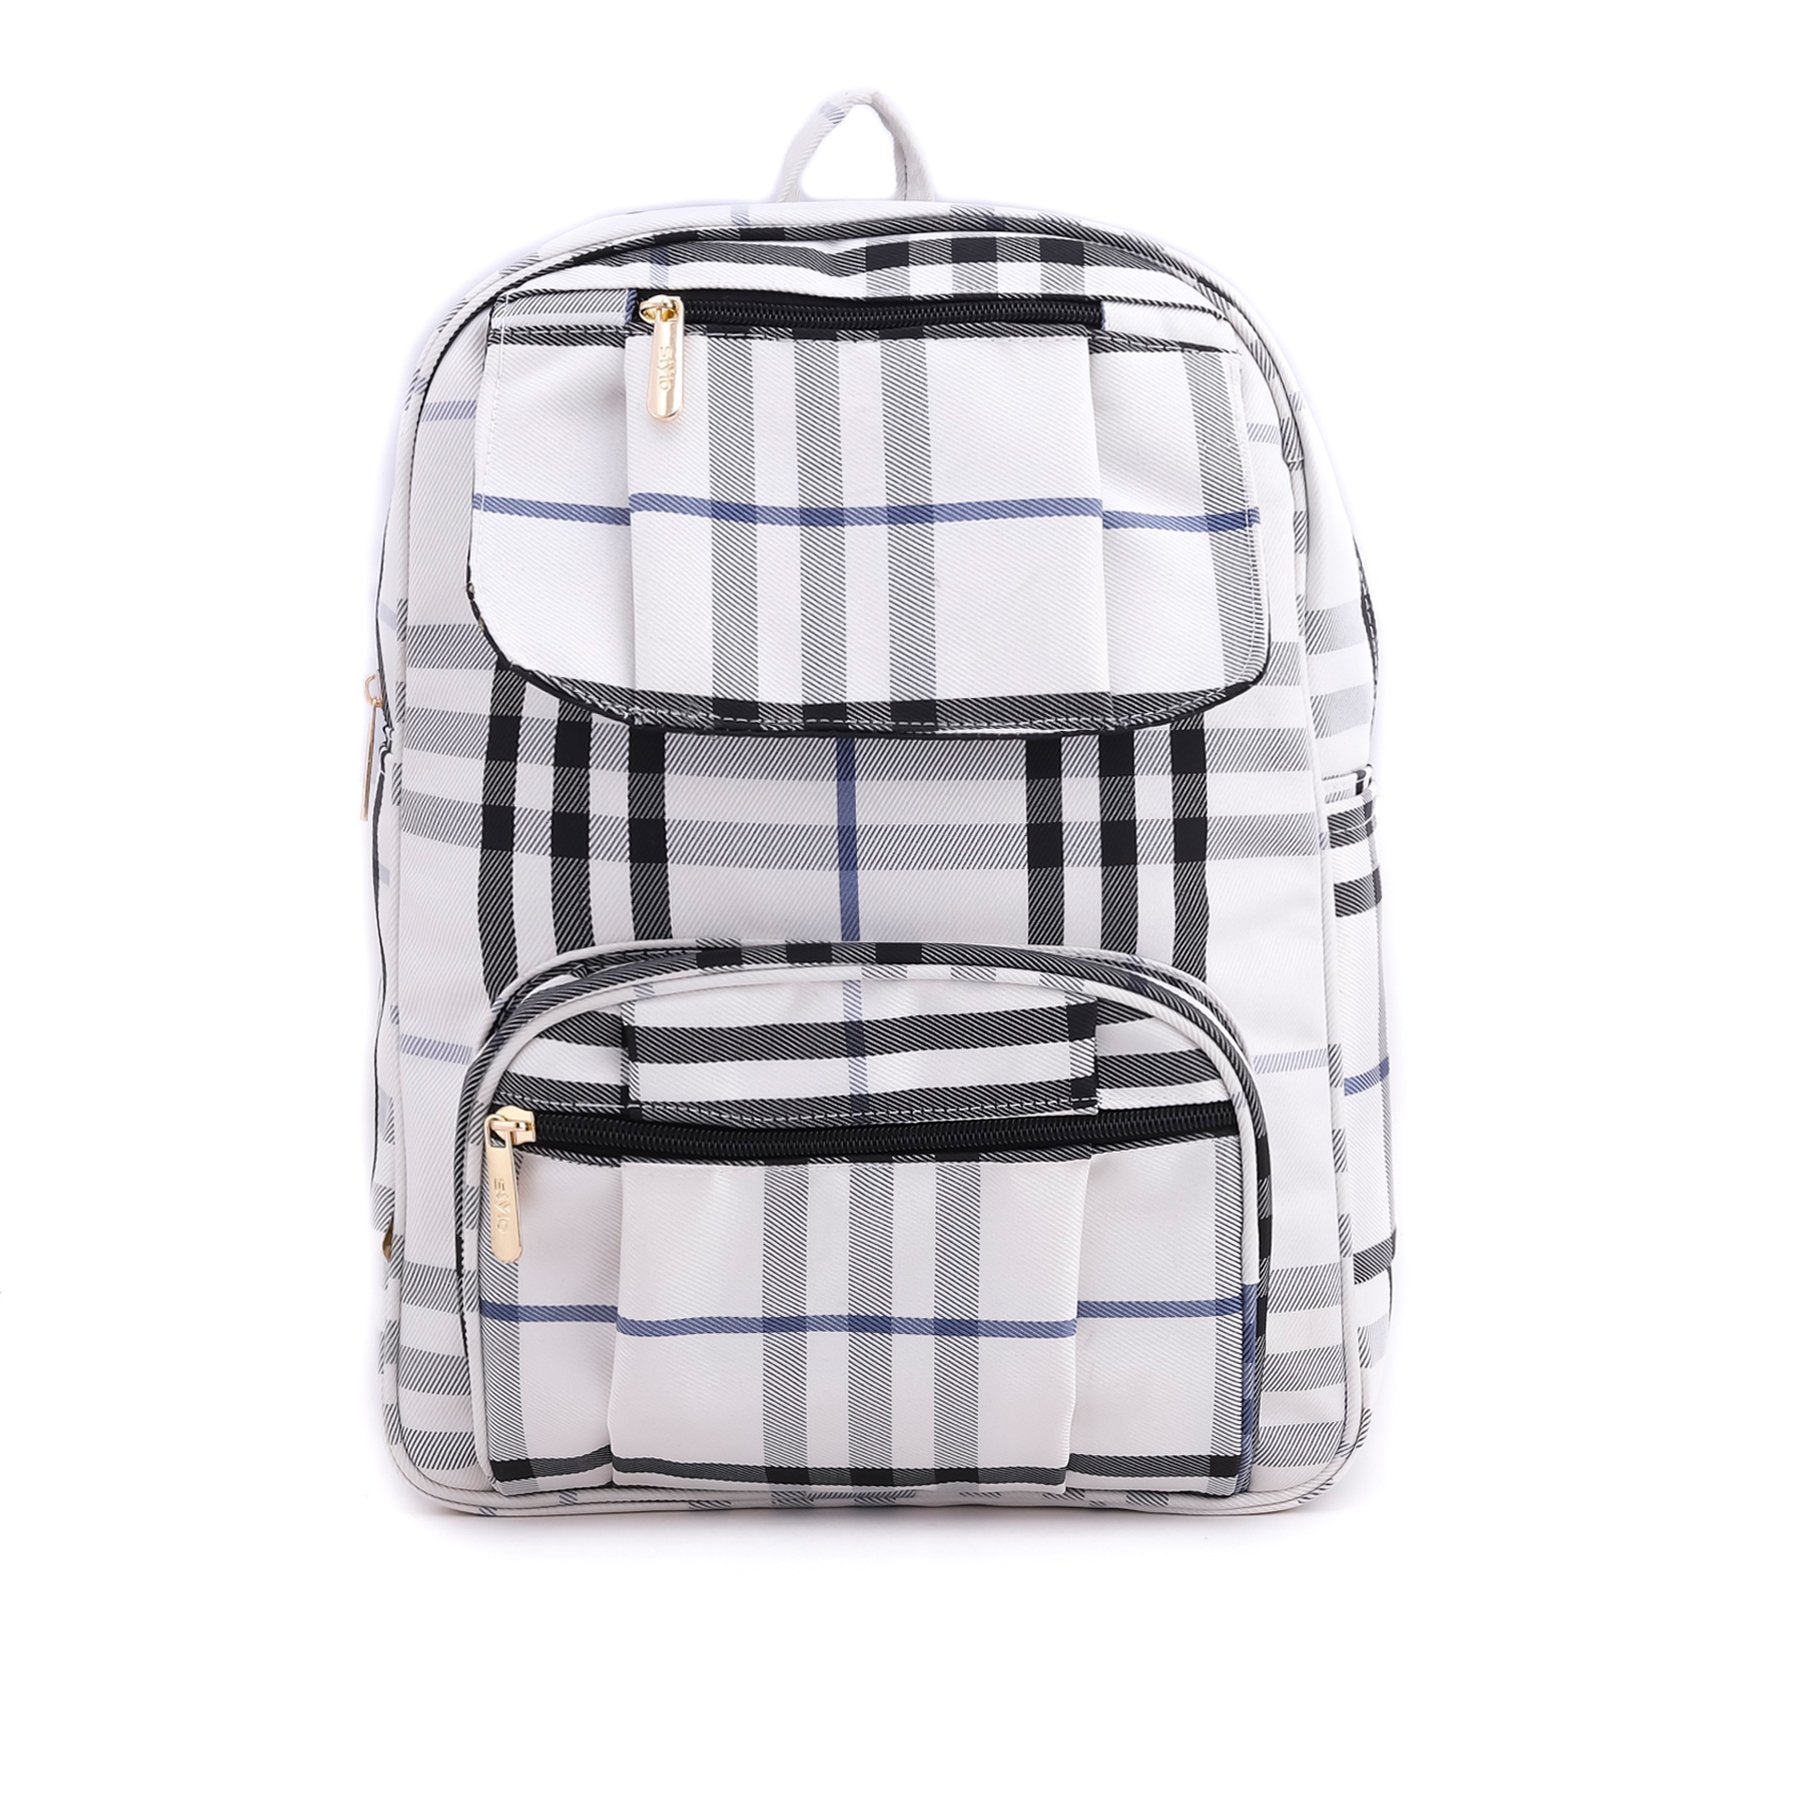 White Color Casual Backpack P54739